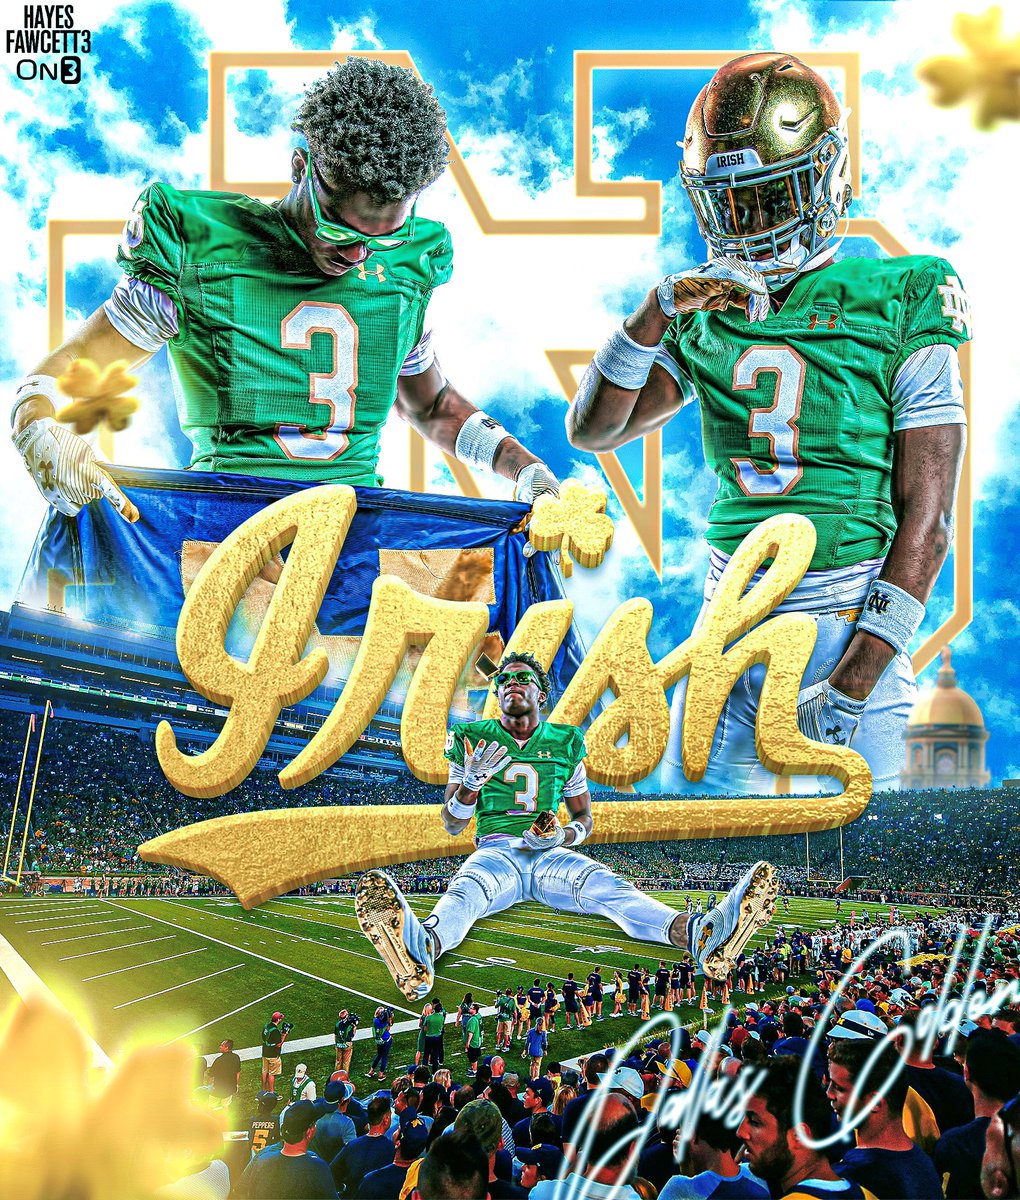 BREAKING: Four-Star Safety Dallas Golden has Committed to Notre Dame, he tells me for @on3recruits The 6’1 185 S from Tampa, FL chose the Fighting Irish over Florida State, Clemson, & Georgia “Golden to the Golden Dome”, All Glory to God! ✝️” on3.com/db/dallas-gold…